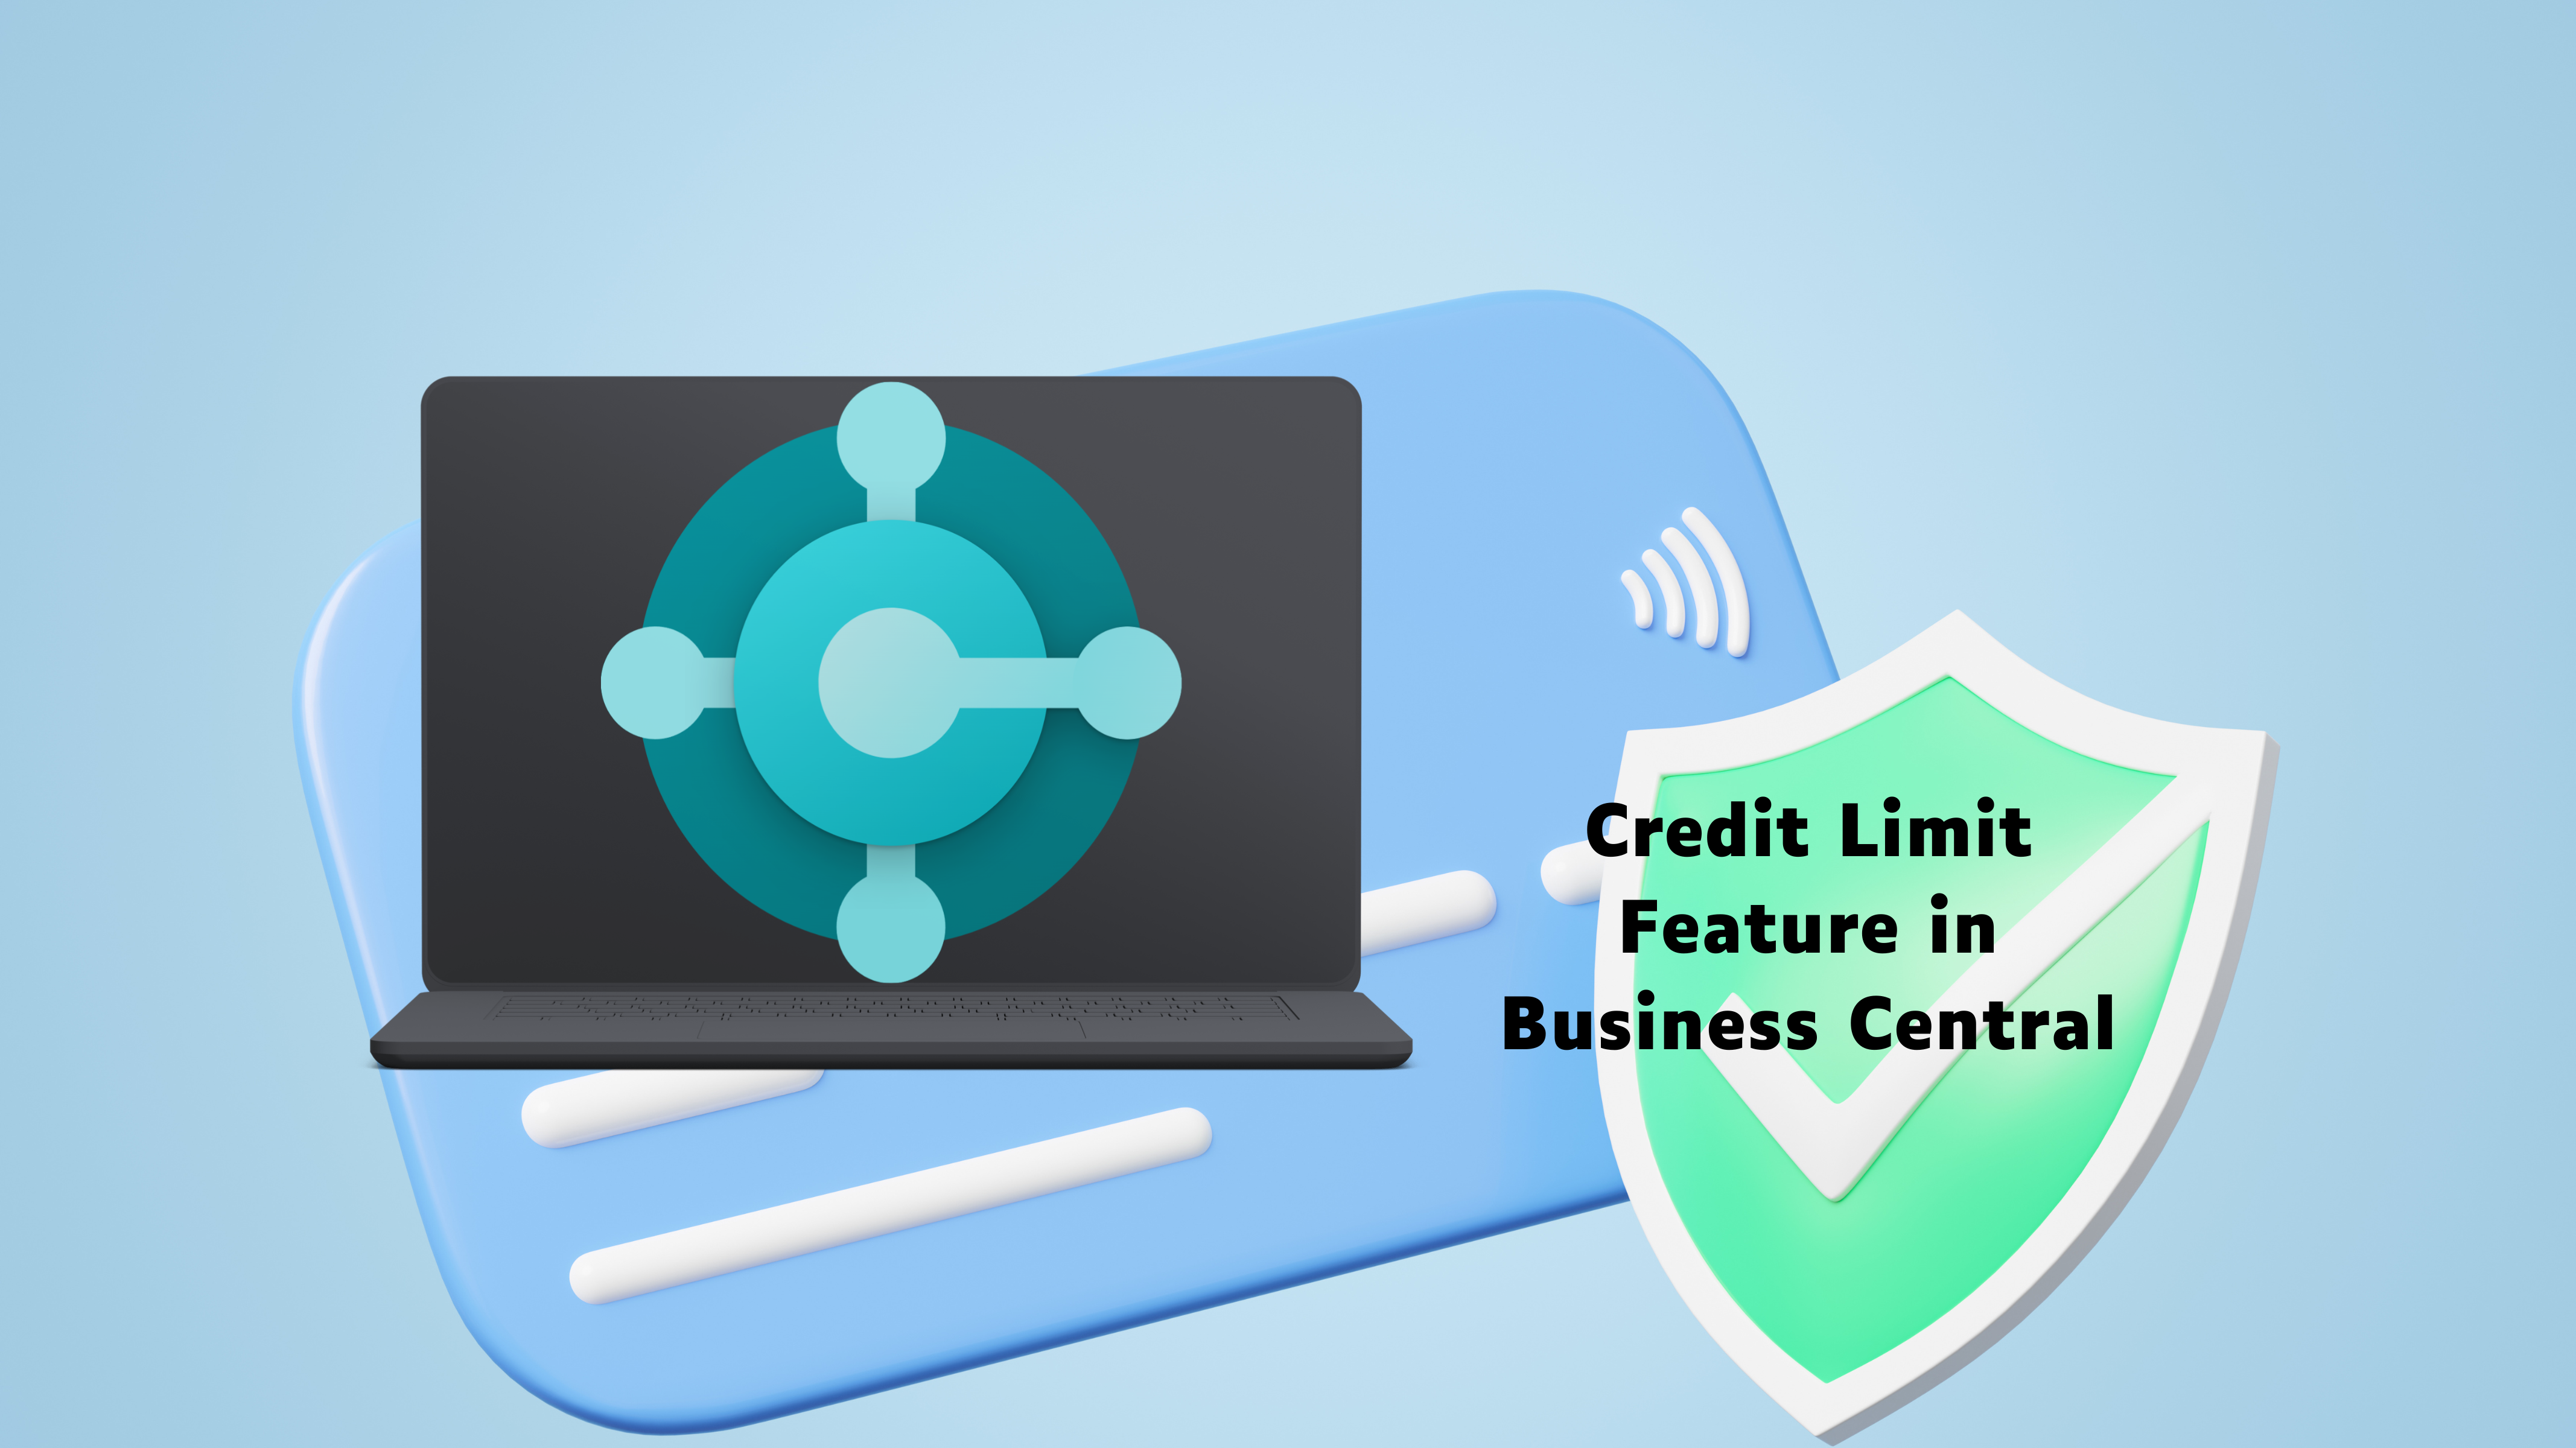 How to use Credit Limit Feature in Business Central?